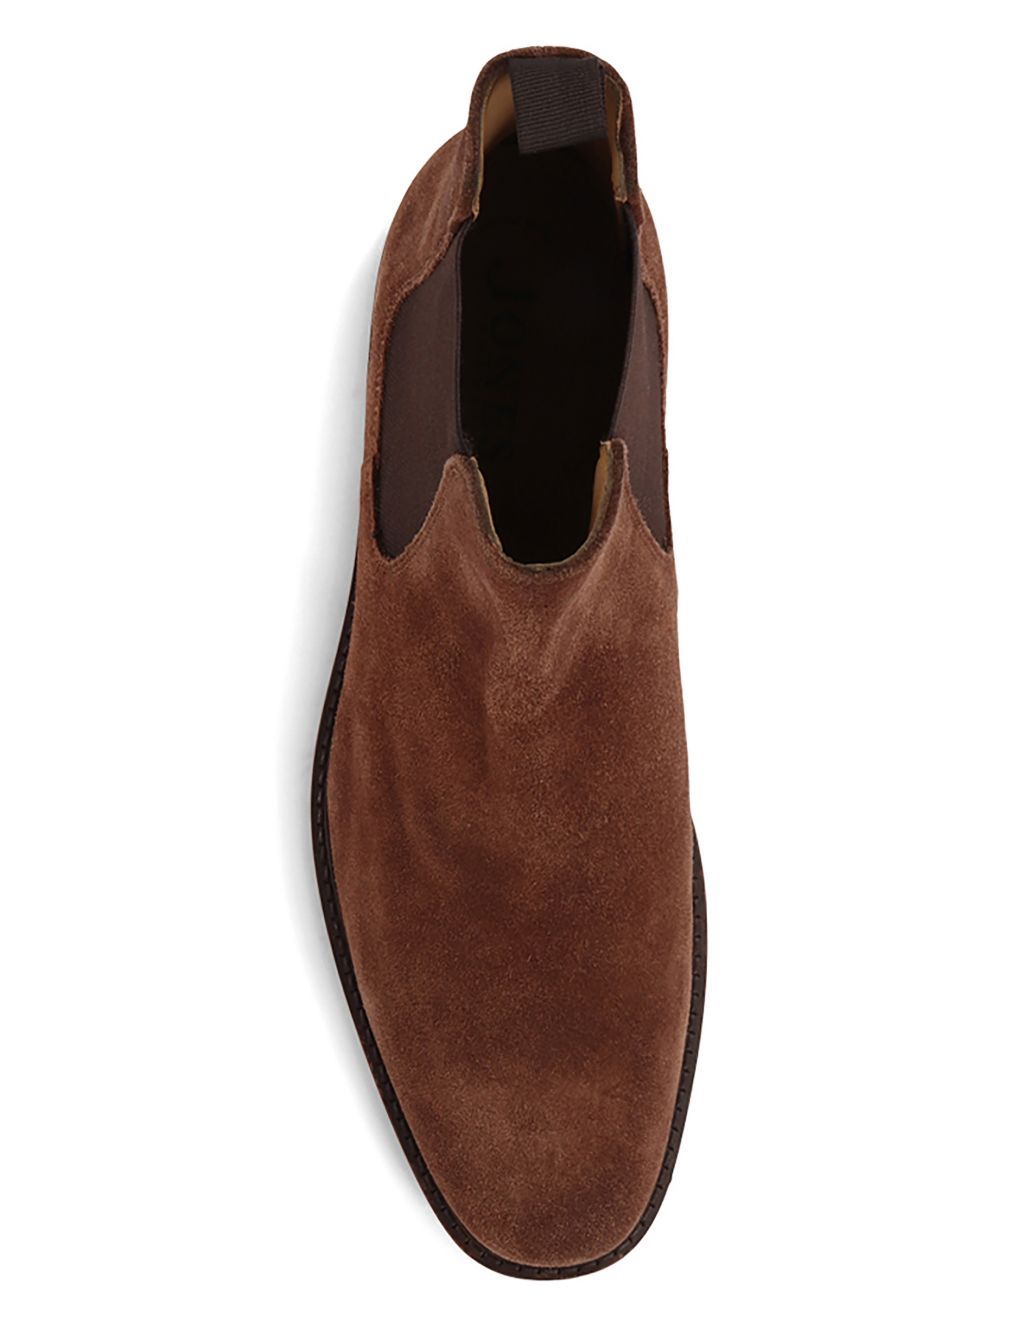 Leather Pull-on Chelsea Boots image 3